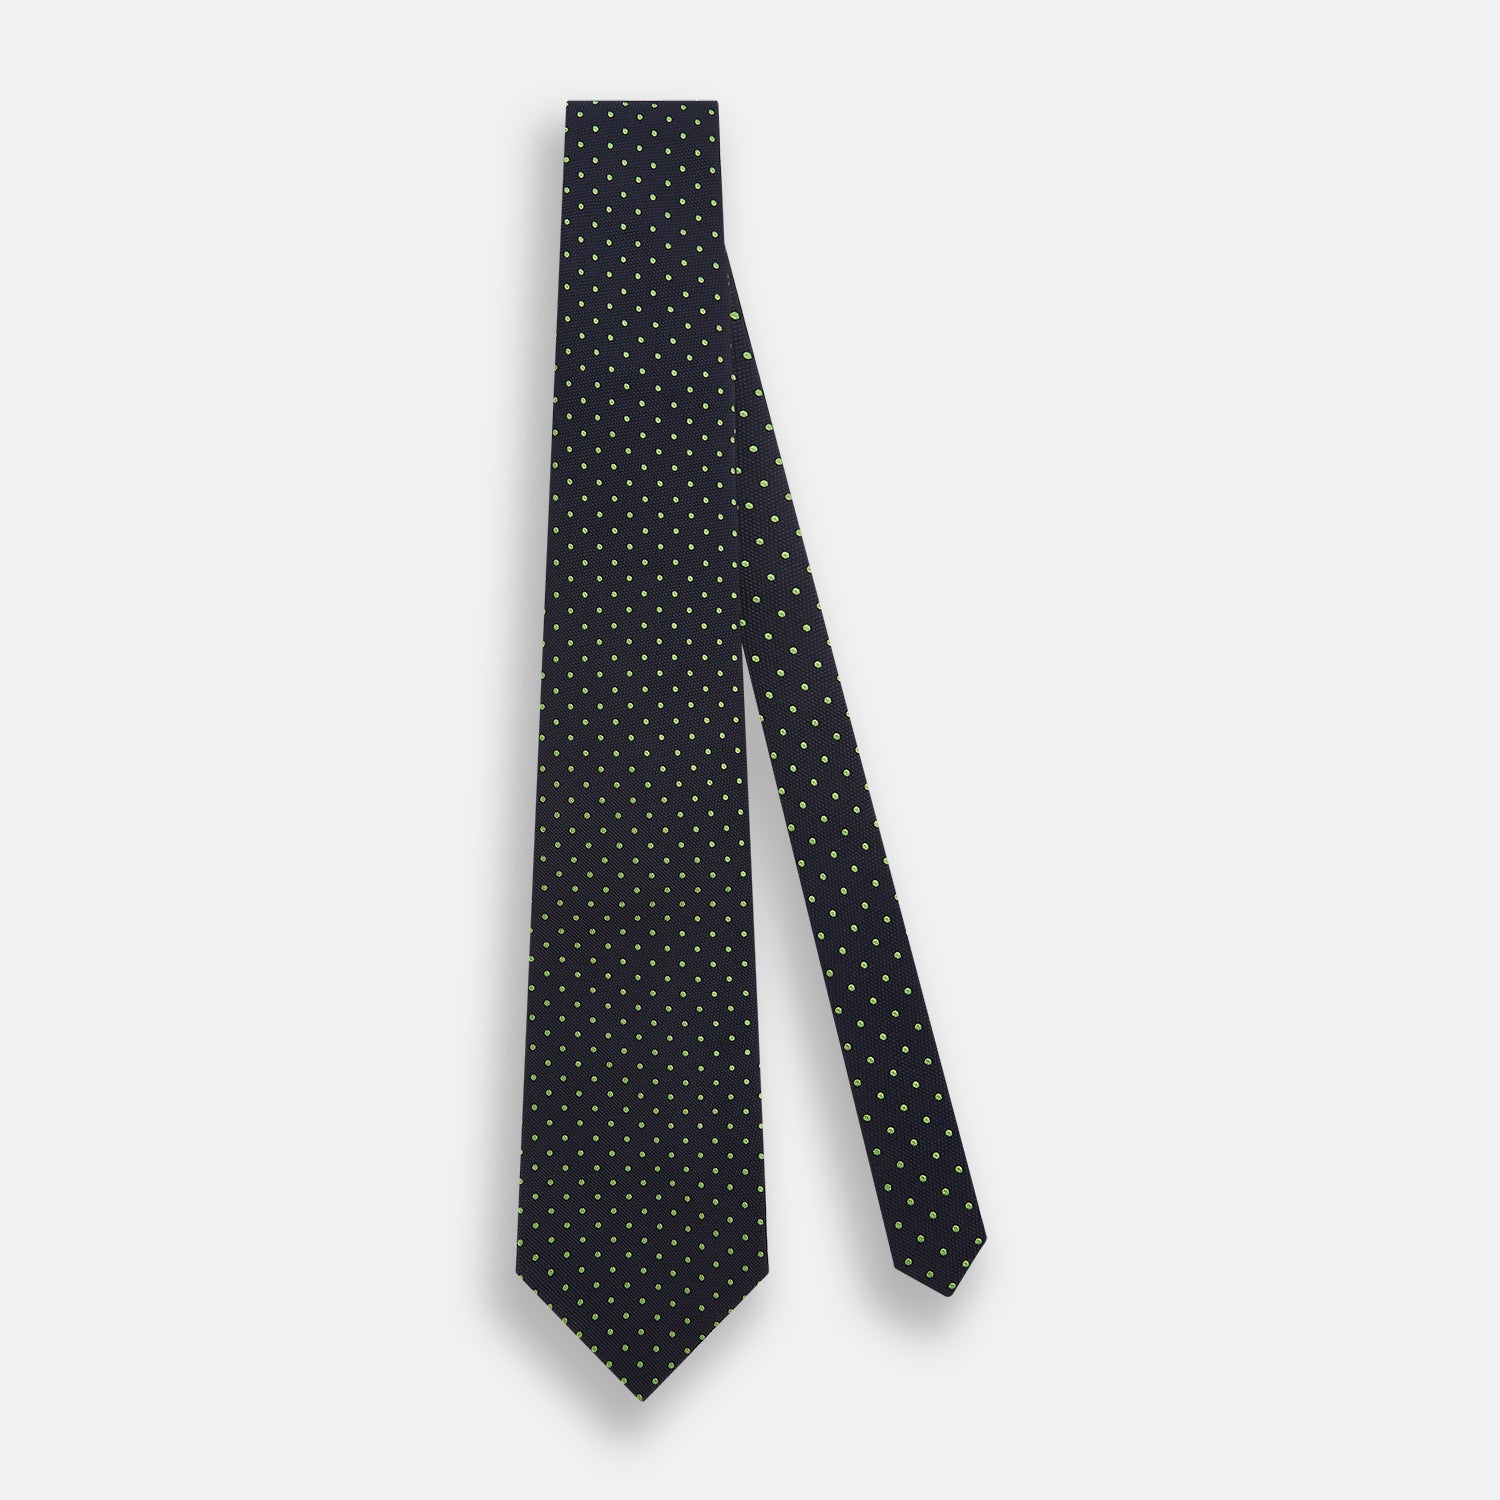 Green and Navy Micro Dot Silk Tie